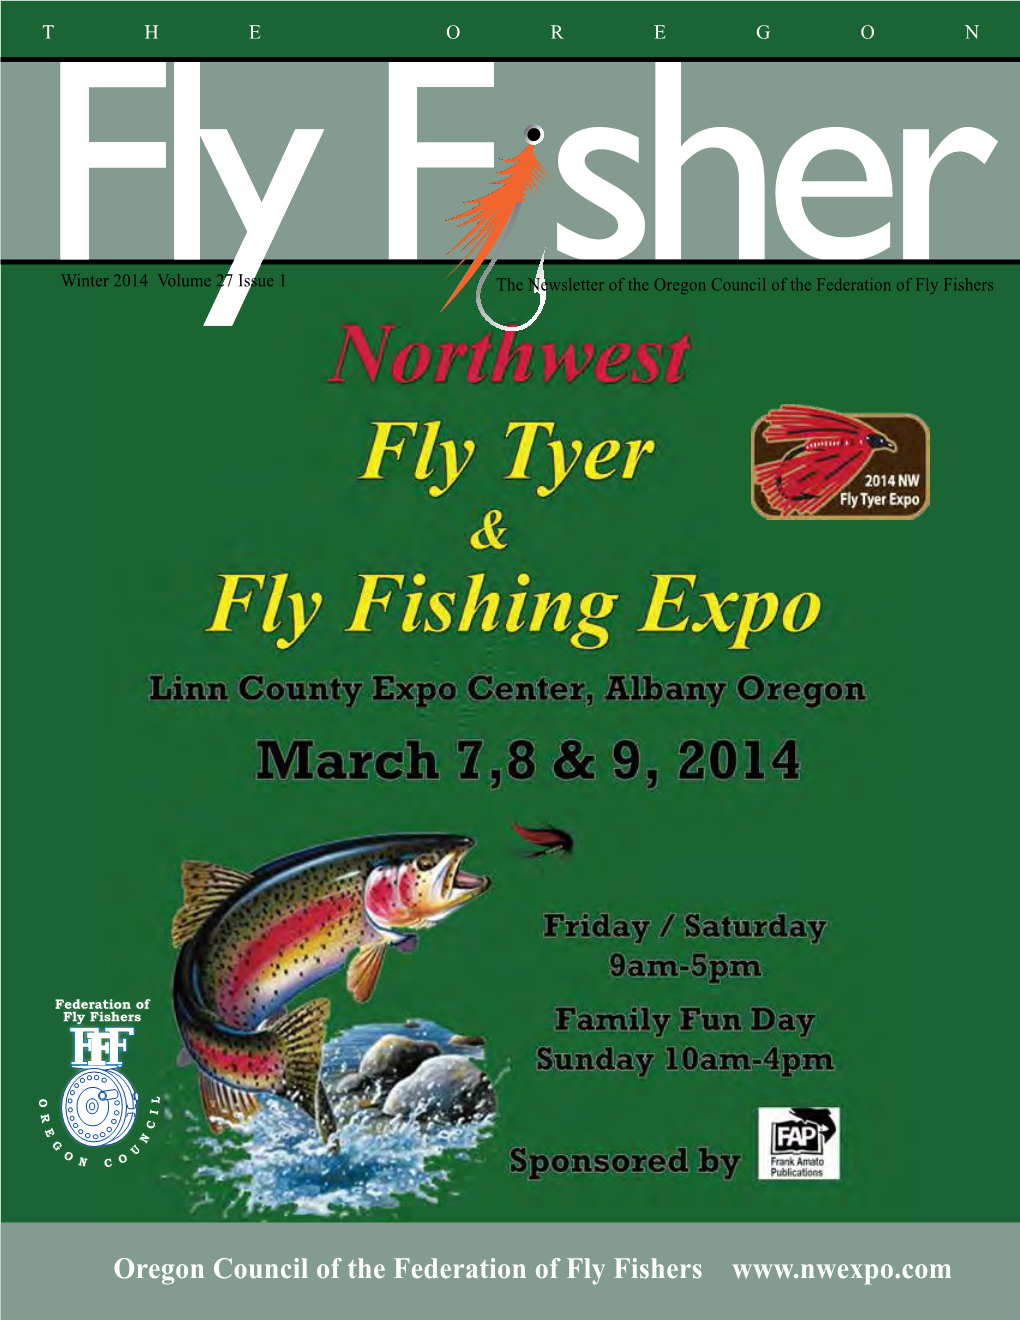 Oregon Council of the Federation of Fly Fishers